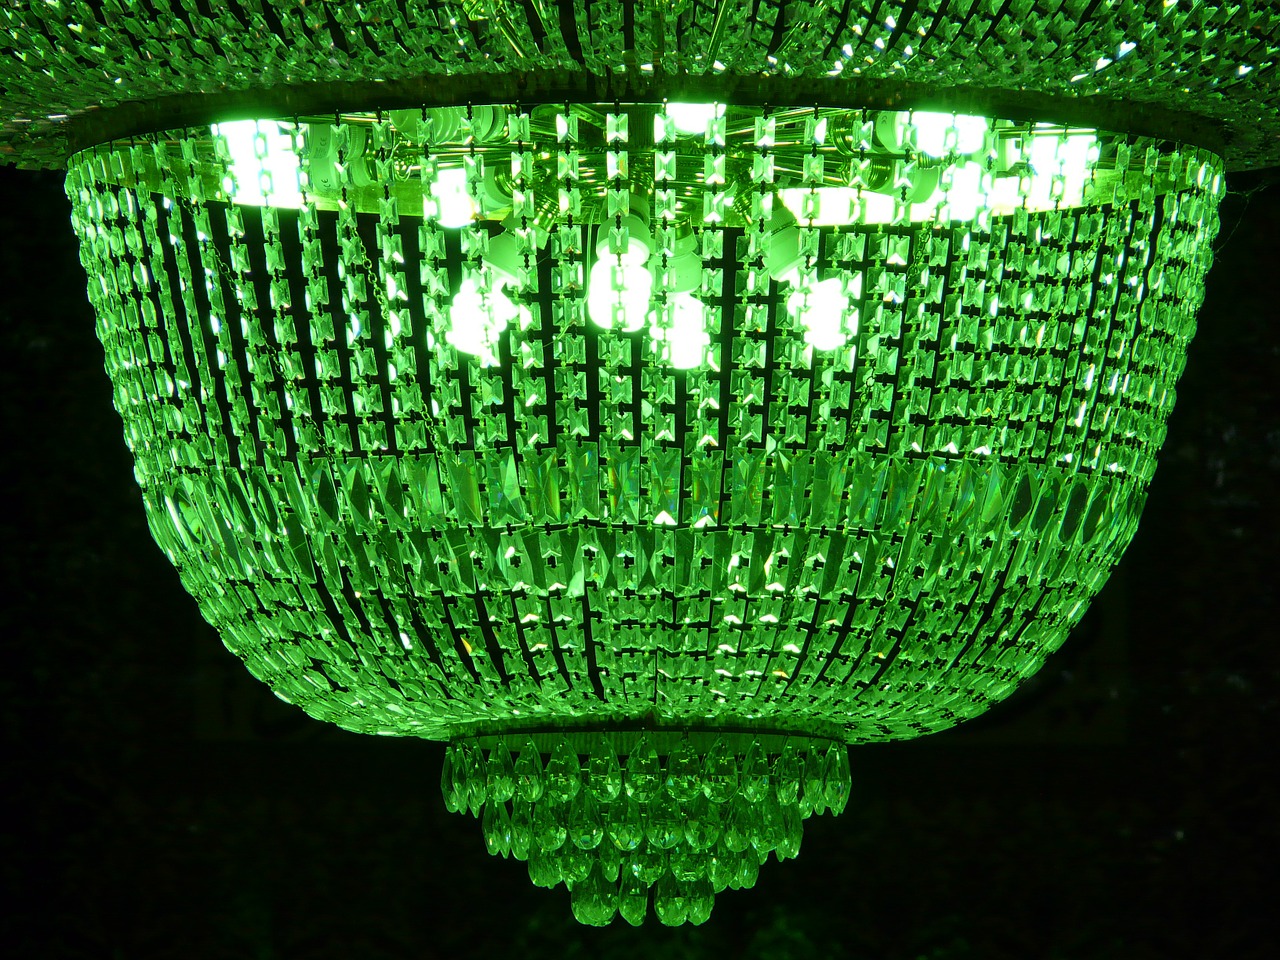 chandelier crystal glass free photo